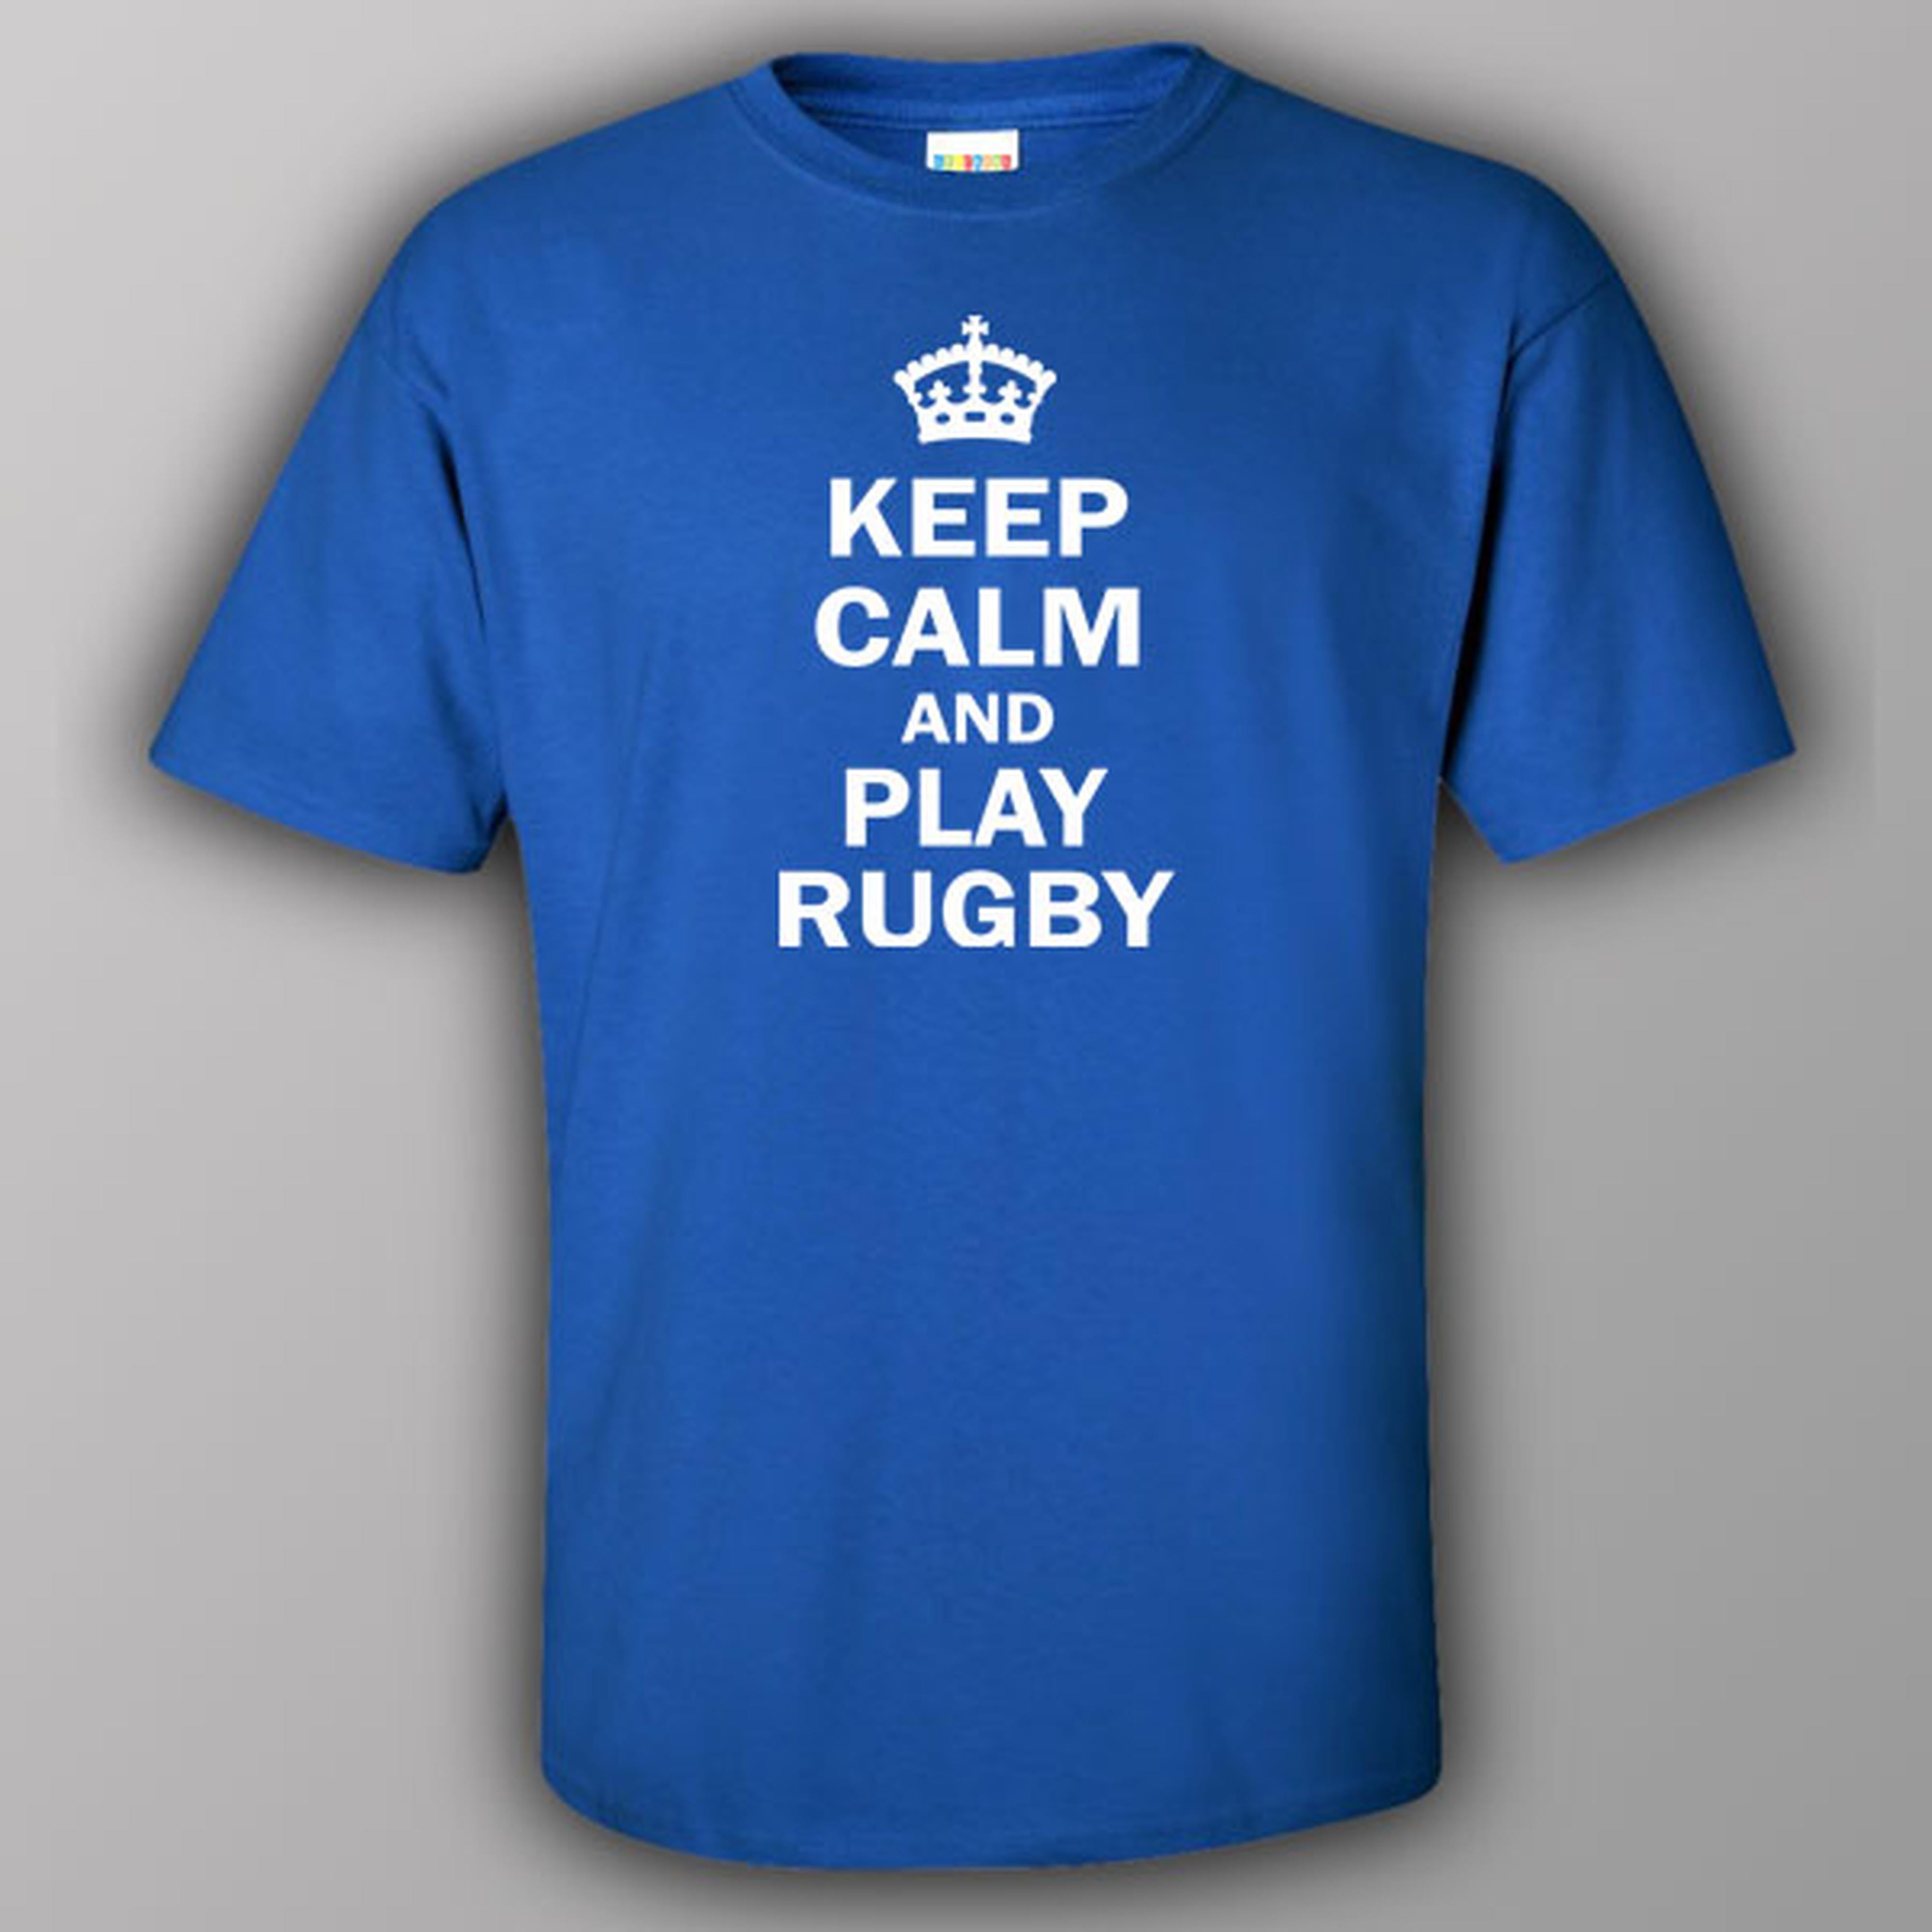 Keep calm and play rugby - T-shirt